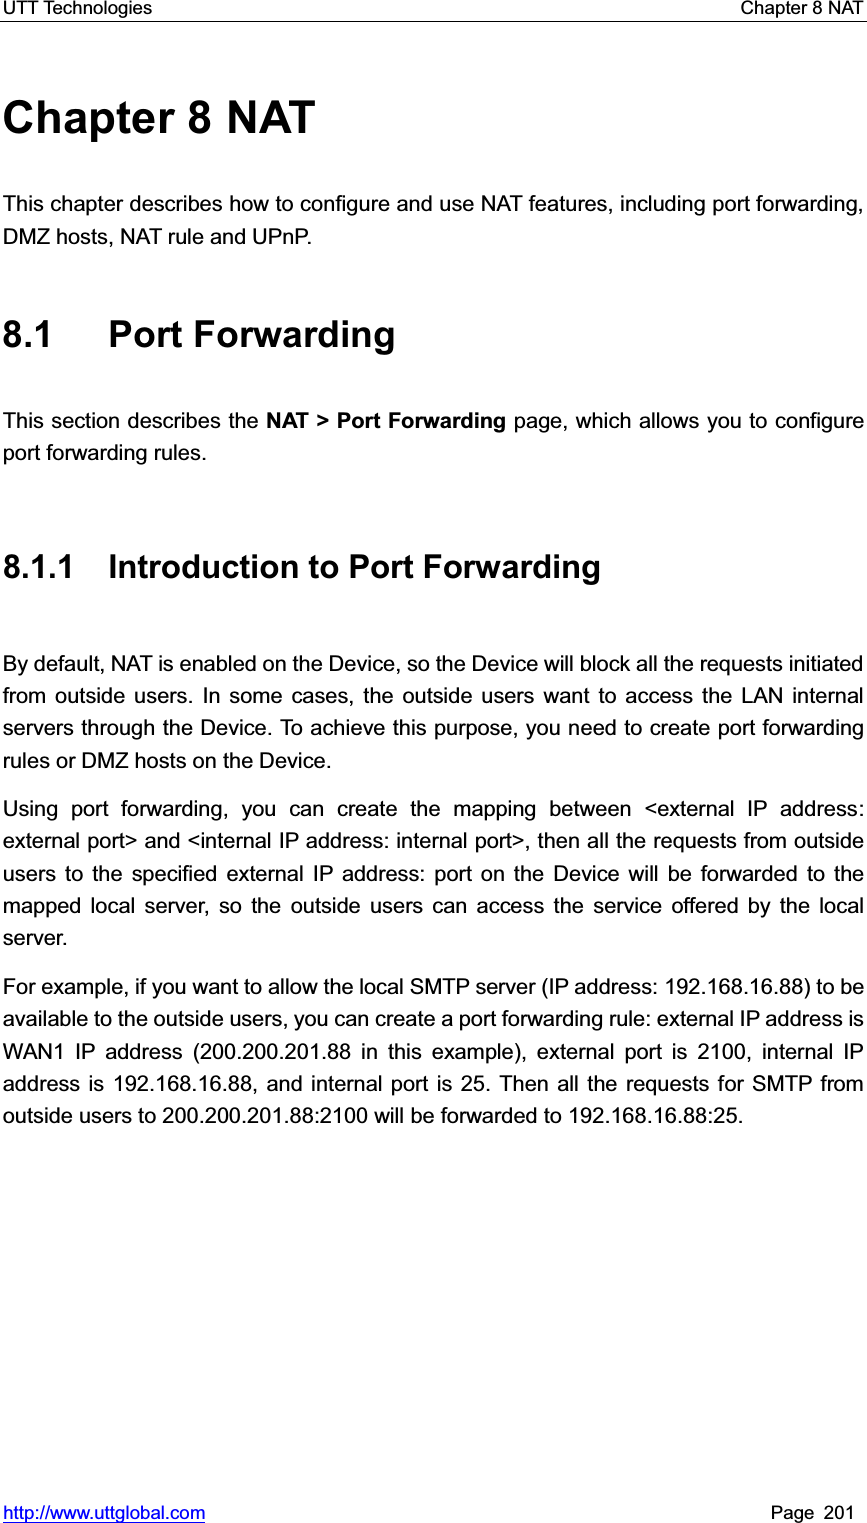 UTT Technologies    Chapter 8 NAT   http://www.uttglobal.com Page 201 Chapter 8 NAT This chapter describes how to configure and use NAT features, including port forwarding, DMZ hosts, NAT rule and UPnP. 8.1 Port Forwarding This section describes the NAT &gt; Port Forwarding page, which allows you to configure port forwarding rules. 8.1.1 Introduction to Port Forwarding By default, NAT is enabled on the Device, so the Device will block all the requests initiated from outside users. In some cases, the outside users want to access the LAN internal servers through the Device. To achieve this purpose, you need to create port forwarding rules or DMZ hosts on the Device. Using port forwarding, you can create the mapping between &lt;external IP address: external port&gt; and &lt;internal IP address: internal port&gt;, then all the requests from outside users to the specified external IP address: port on the Device will be forwarded to the mapped local server, so the outside users can access the service offered by the local server. For example, if you want to allow the local SMTP server (IP address: 192.168.16.88) to be available to the outside users, you can create a port forwarding rule: external IP address is WAN1 IP address (200.200.201.88 in this example), external port is 2100, internal IP address is 192.168.16.88, and internal port is 25. Then all the requests for SMTP from outside users to 200.200.201.88:2100 will be forwarded to 192.168.16.88:25. 